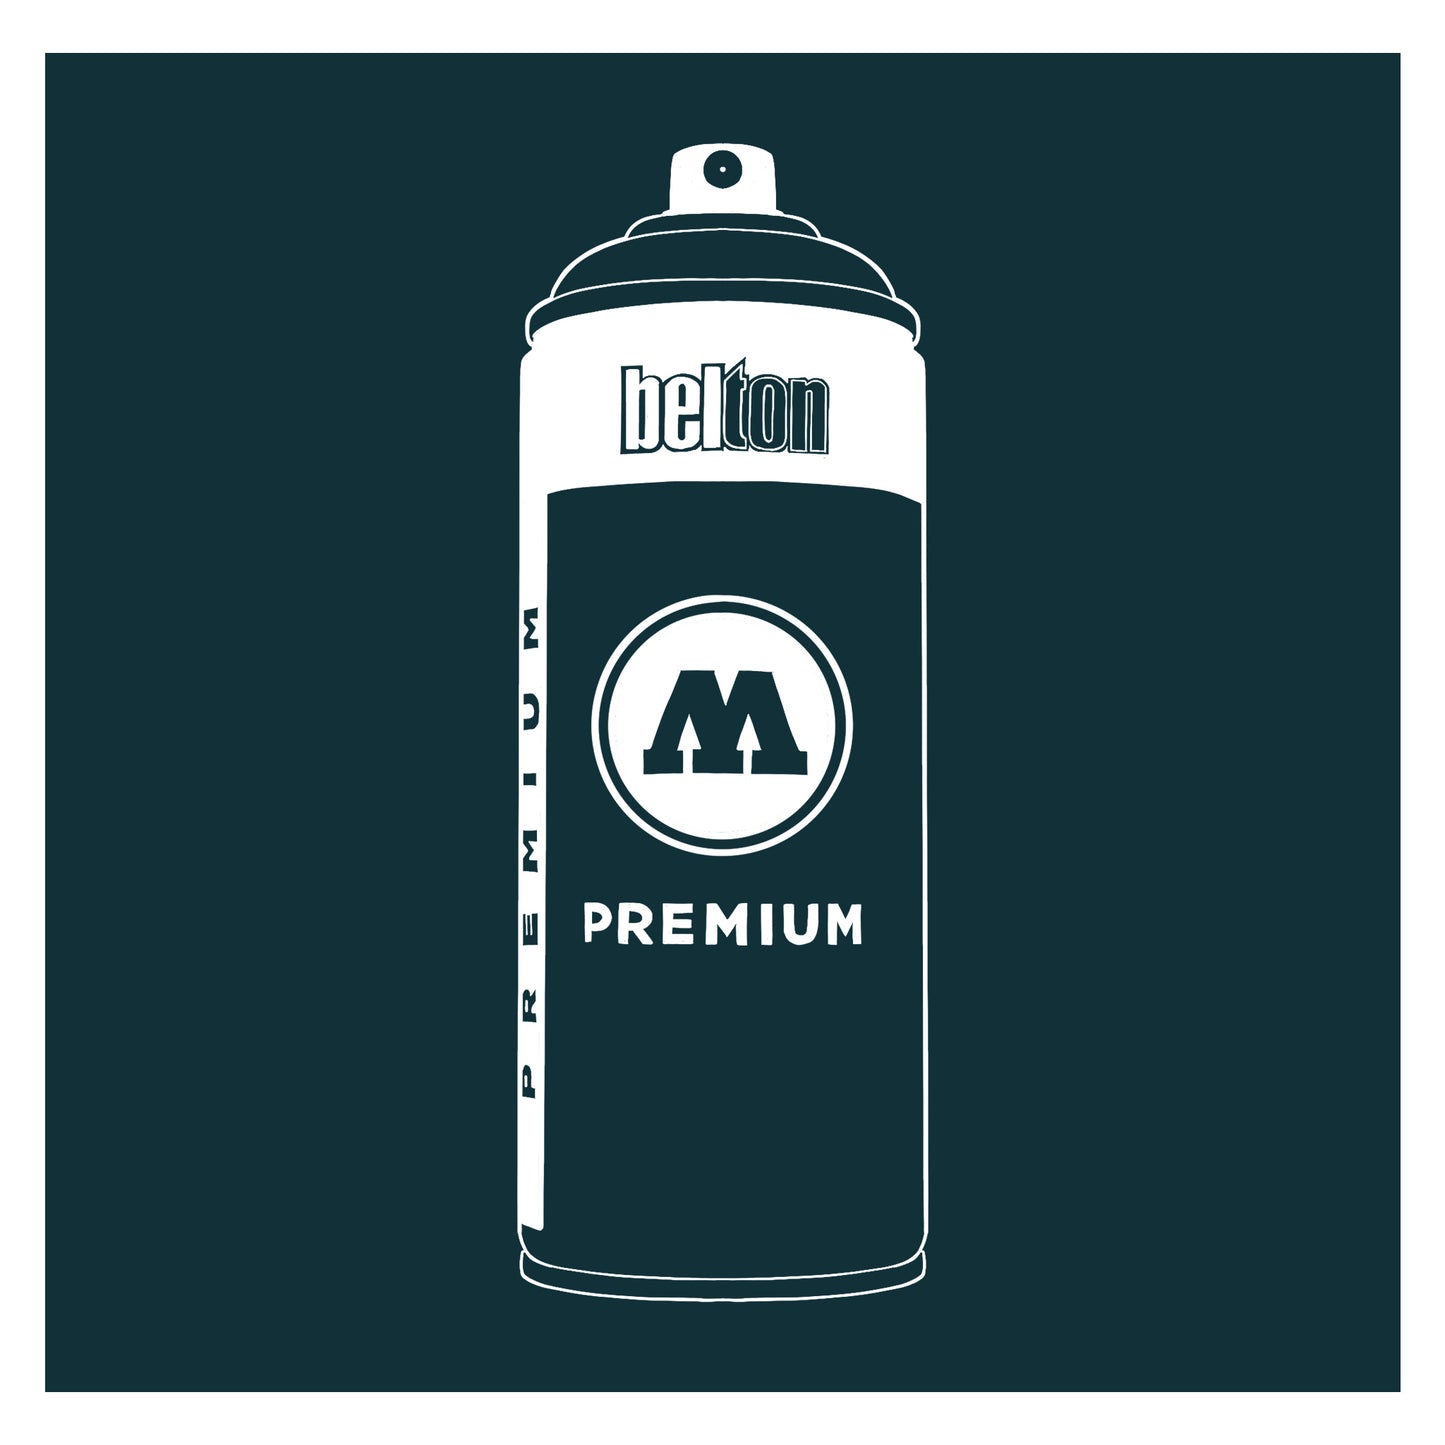 A white outline drawing of a navy blue spray paint can with the words "belton","premium" and the letter"M" written on the face in black and white font. The background is a color swatch of the same navy blue with a white border